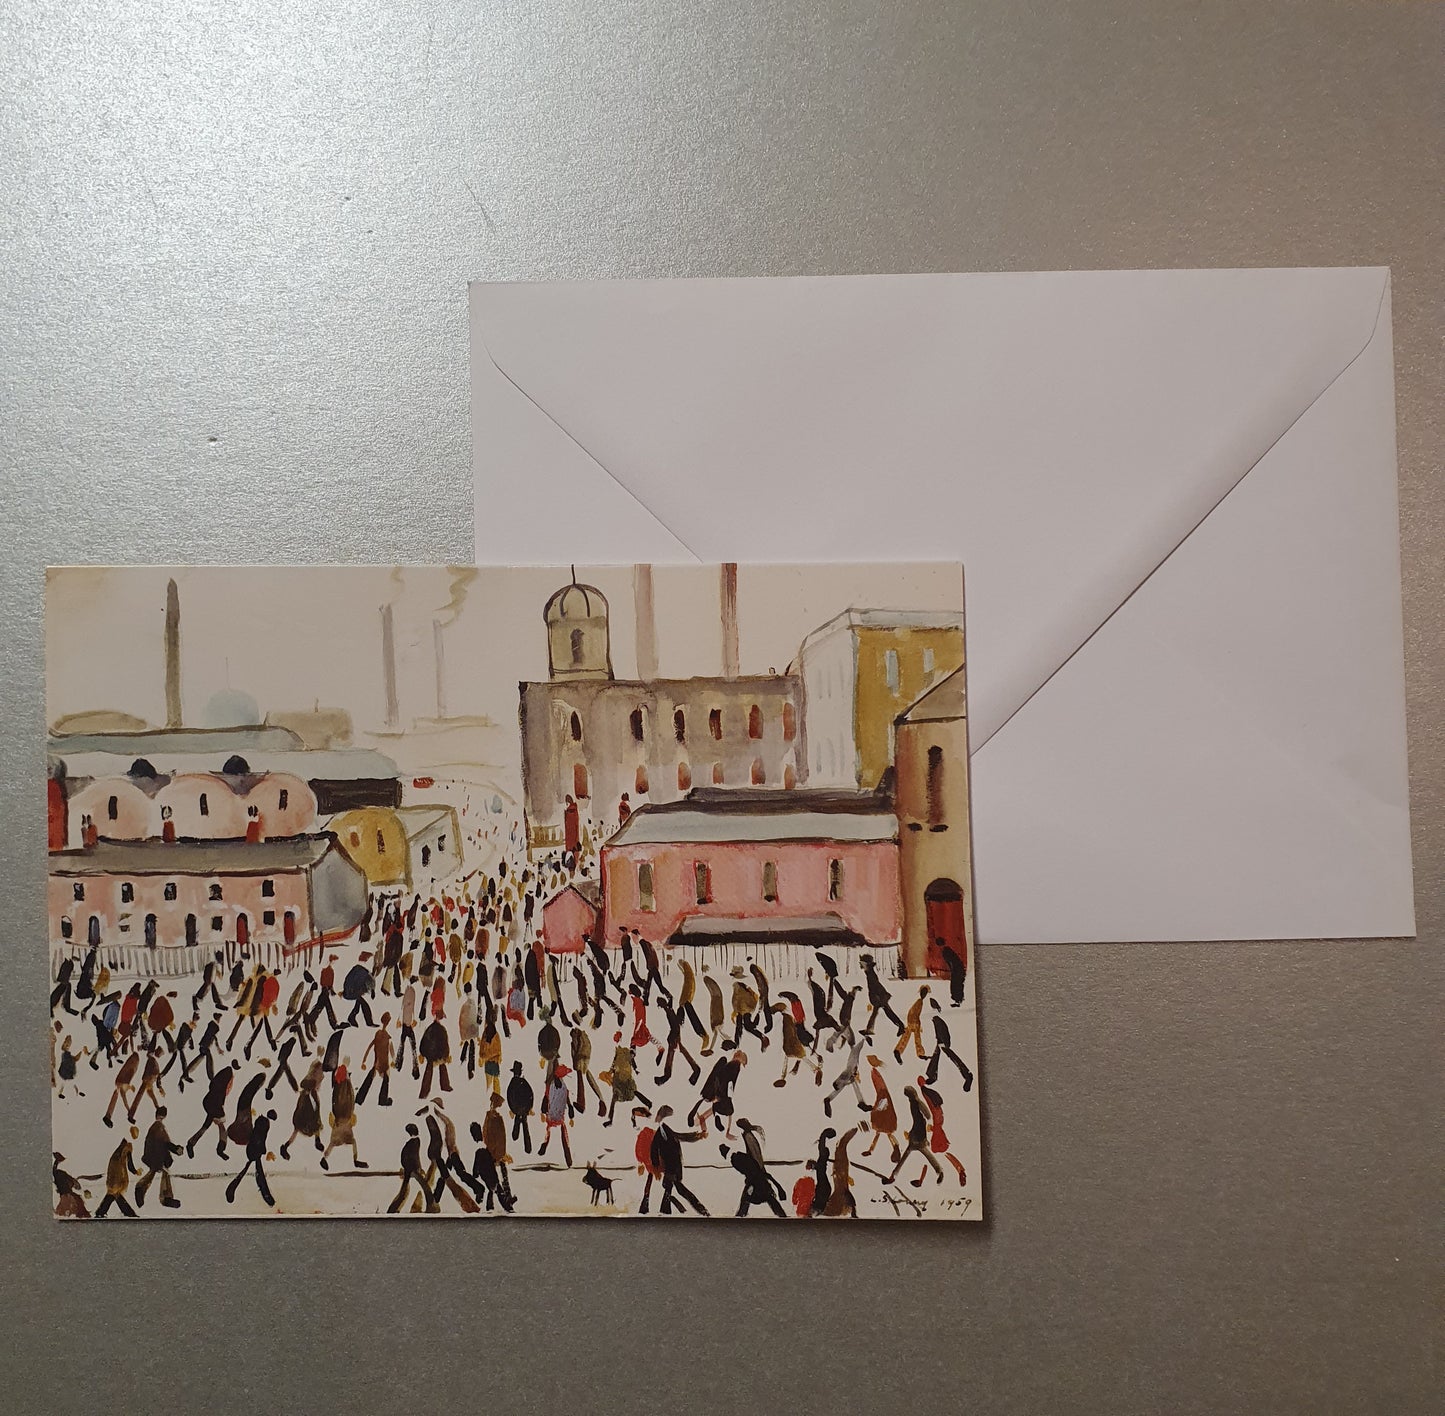 Lowry Greetings Card - Going to Work, 1959